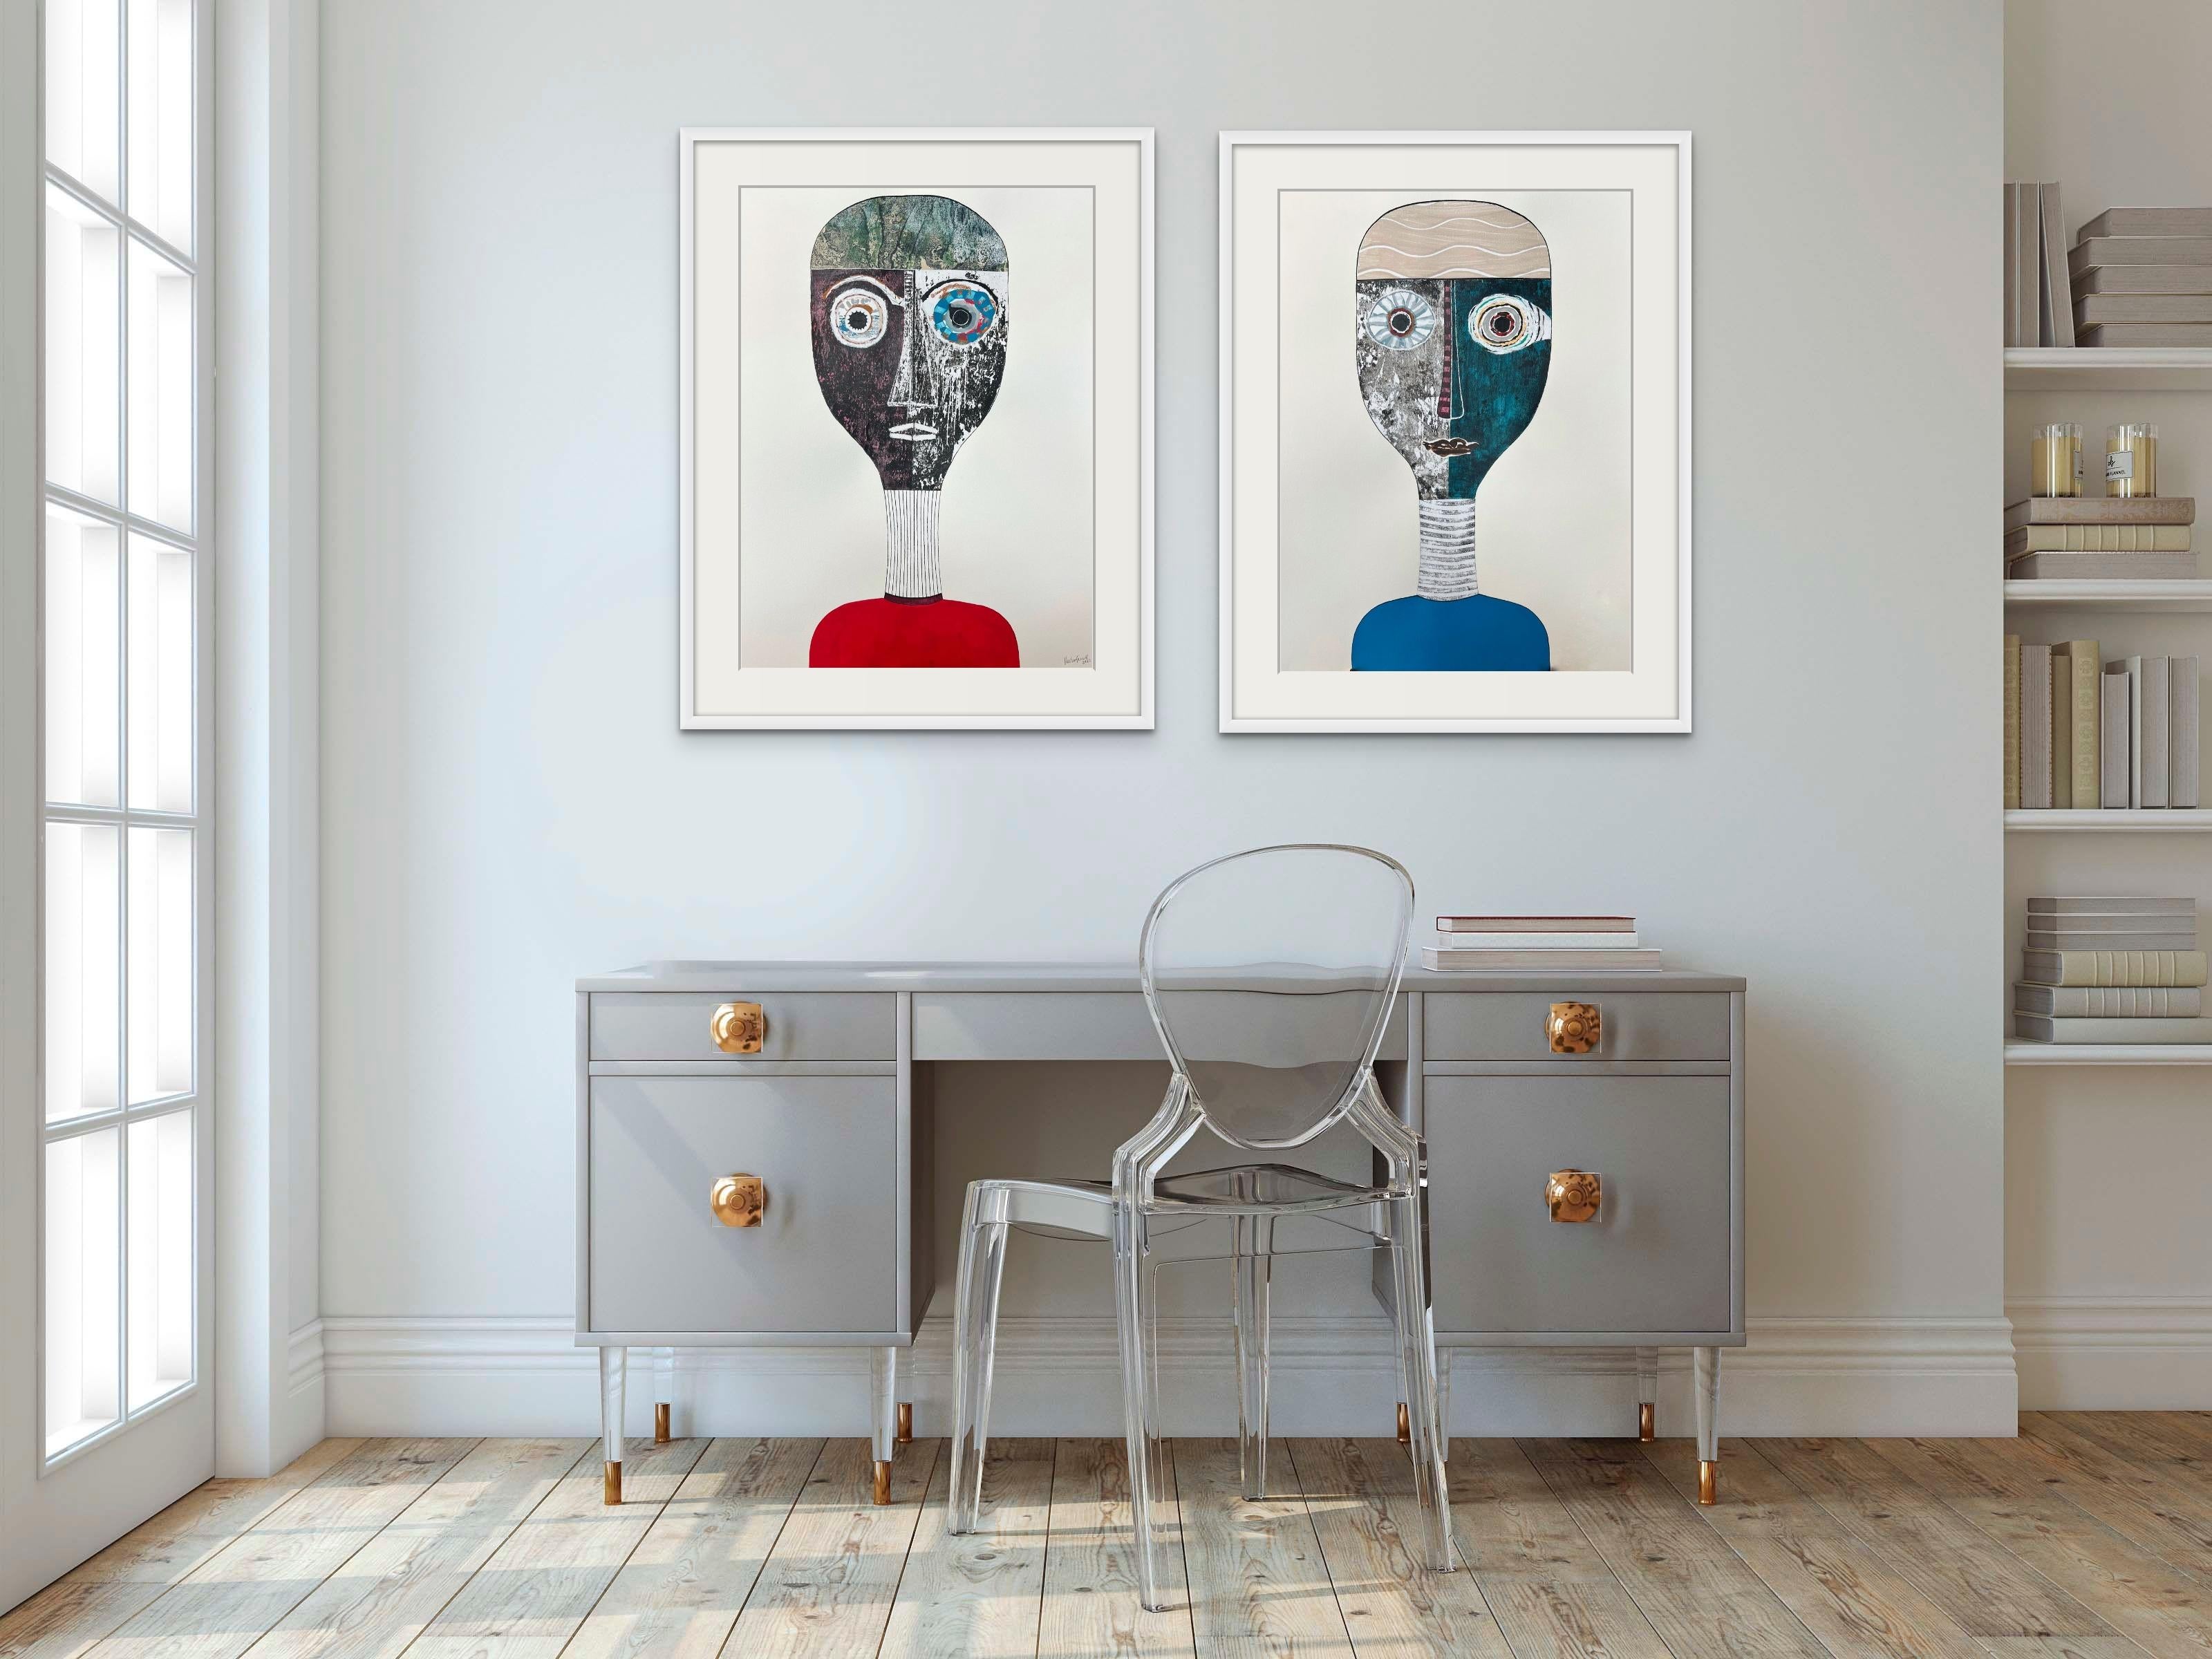 Diptych Figurative Portraits of a Man and Women, Contemporary Cuban Art - Abstract Expressionist Mixed Media Art by Hector Frank